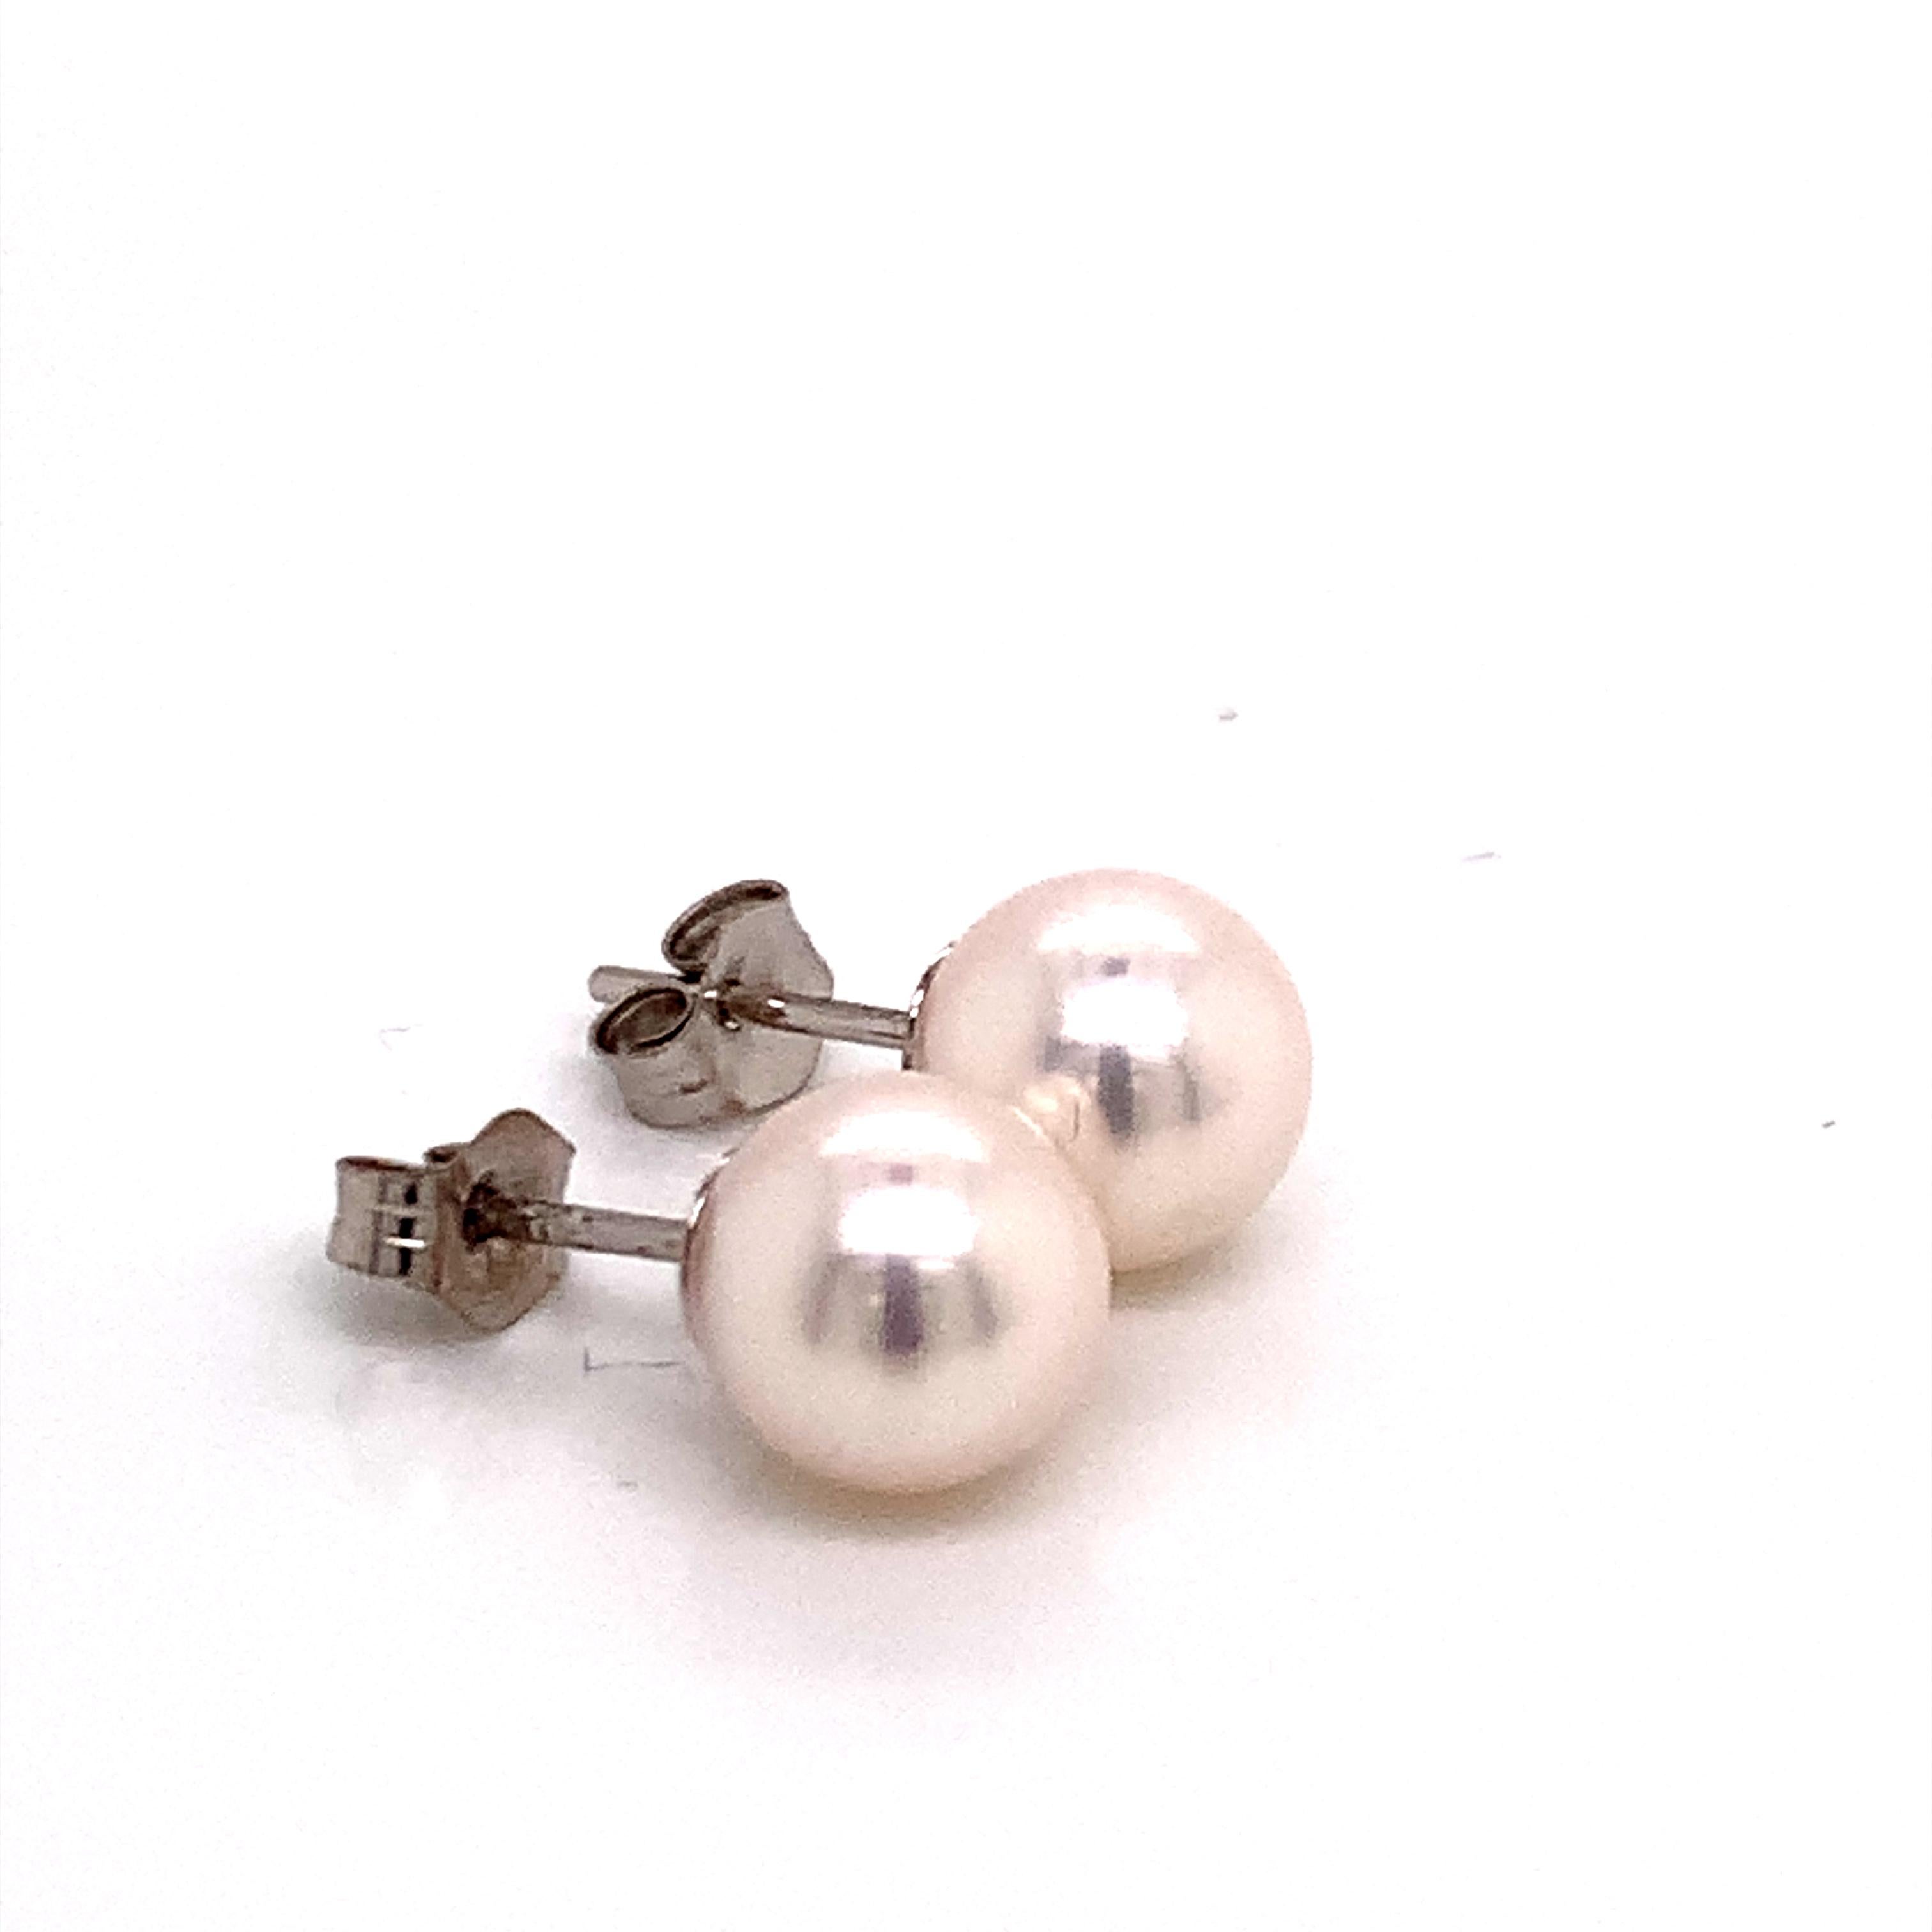 Fine Quality Akoya Pearl Earrings 14k White Gold 7.47 mm Certified $699 015872

This is a one of a Kind Unique Custom Made Glamorous Piece of Jewelry!
Nothing says, “I Love you” more than Diamonds and Pearls!
This item has been Certified, Inspected,